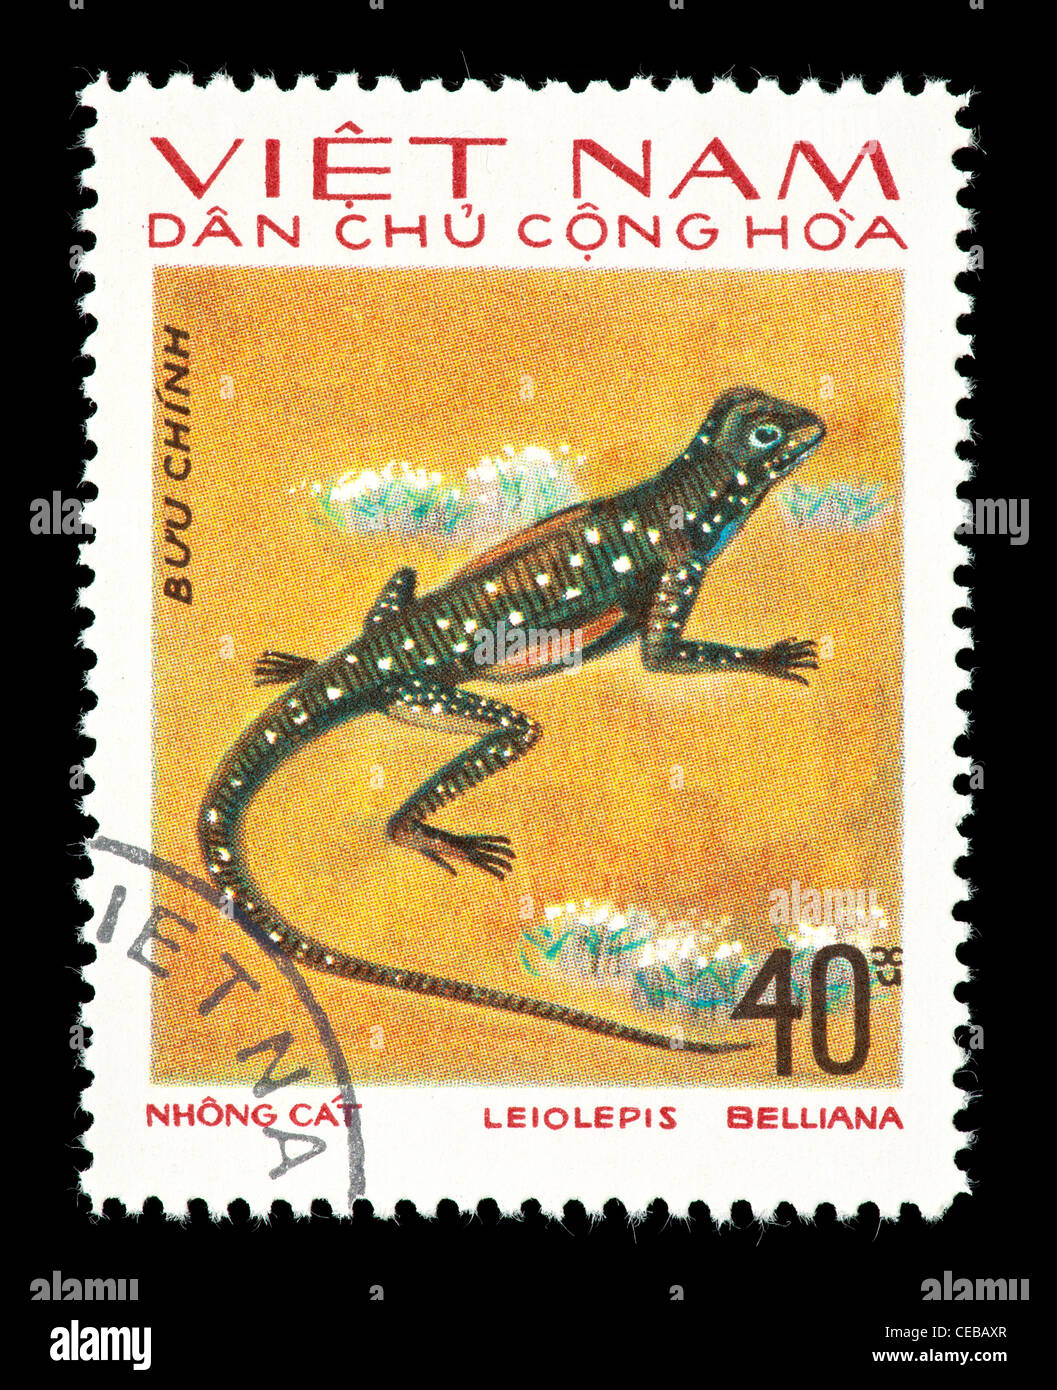 Postage stamp from Vietnam depicting a common spotted butterfly lizard (Leiolepis belliana) Stock Photo